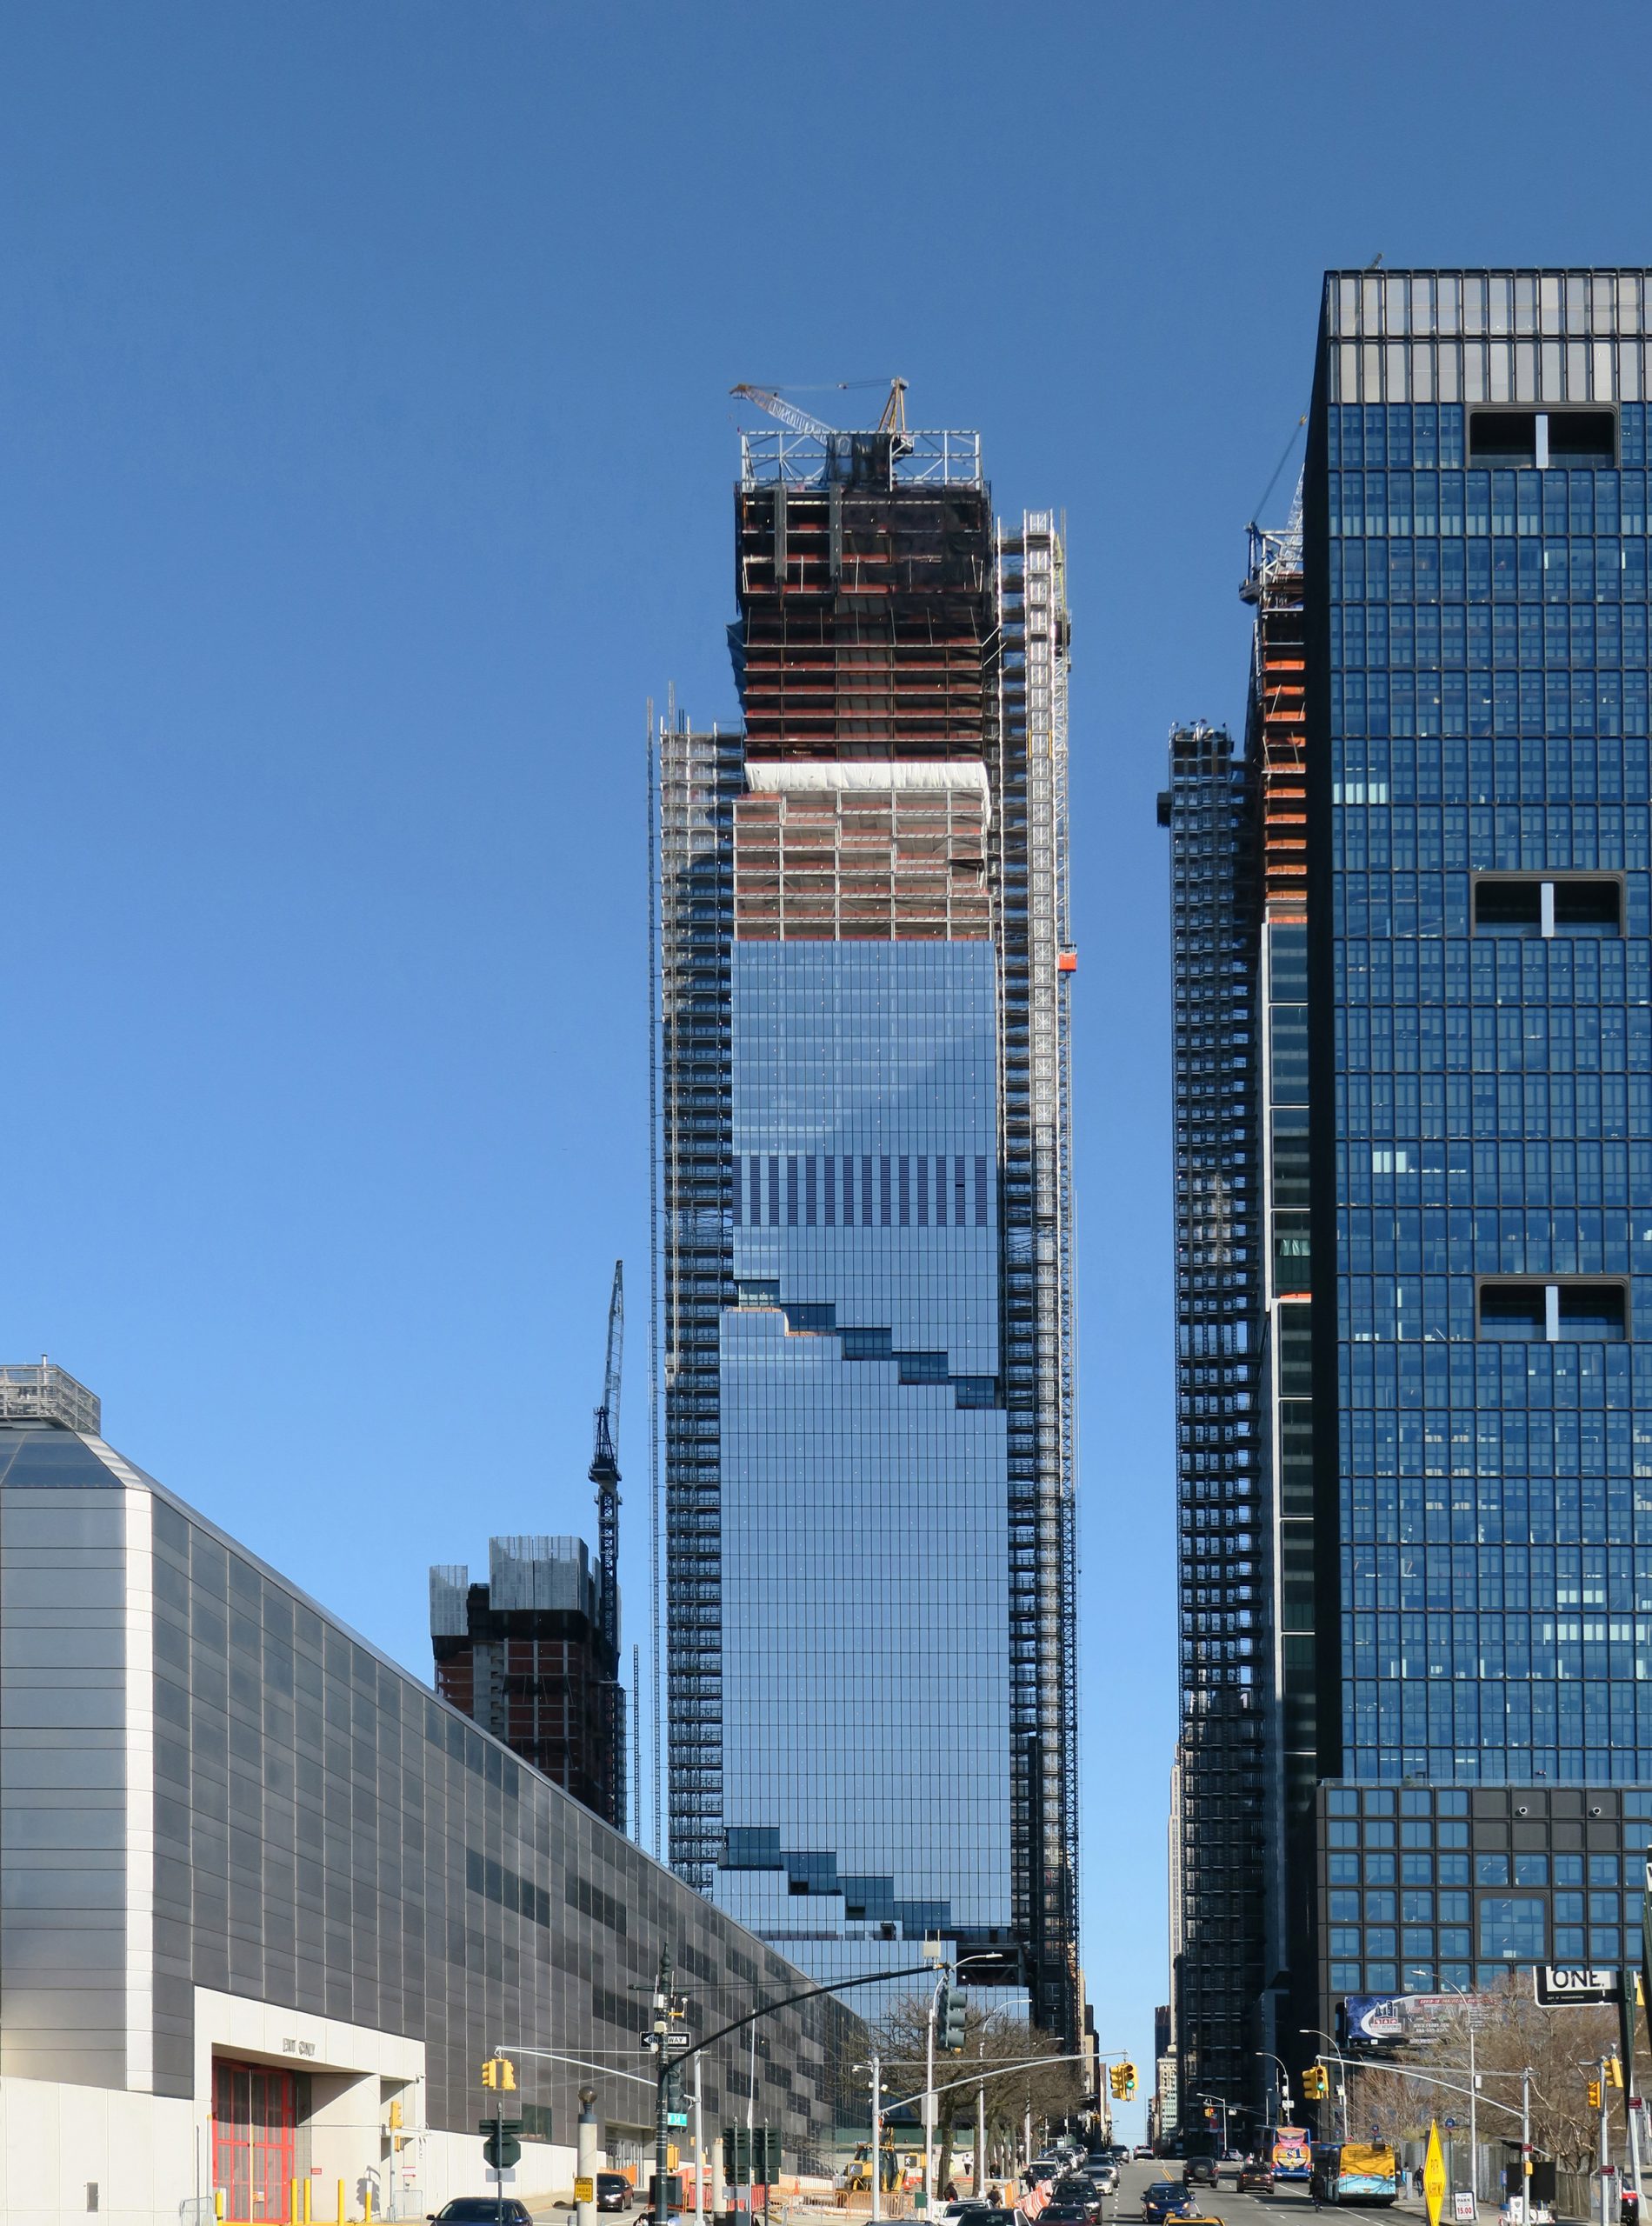 The Spiral under construction viewed from Hudson Yards